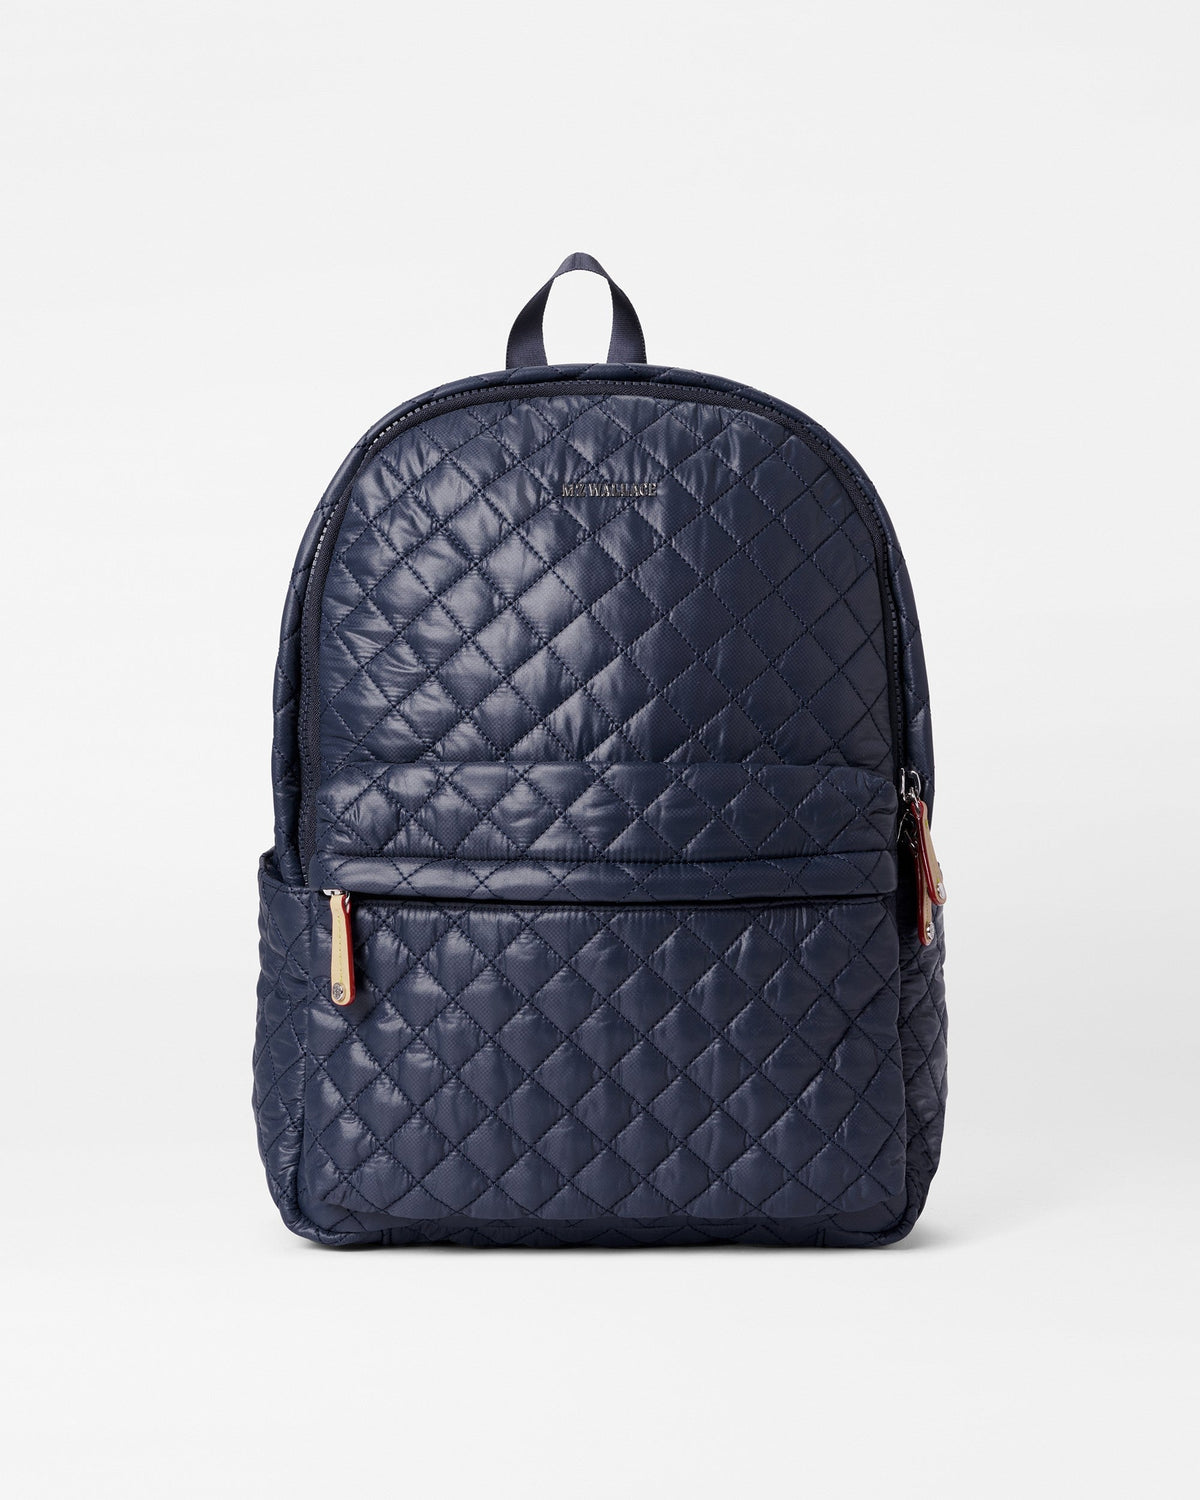 Dawn Metro Backpack Deluxe - MZ WALLACE